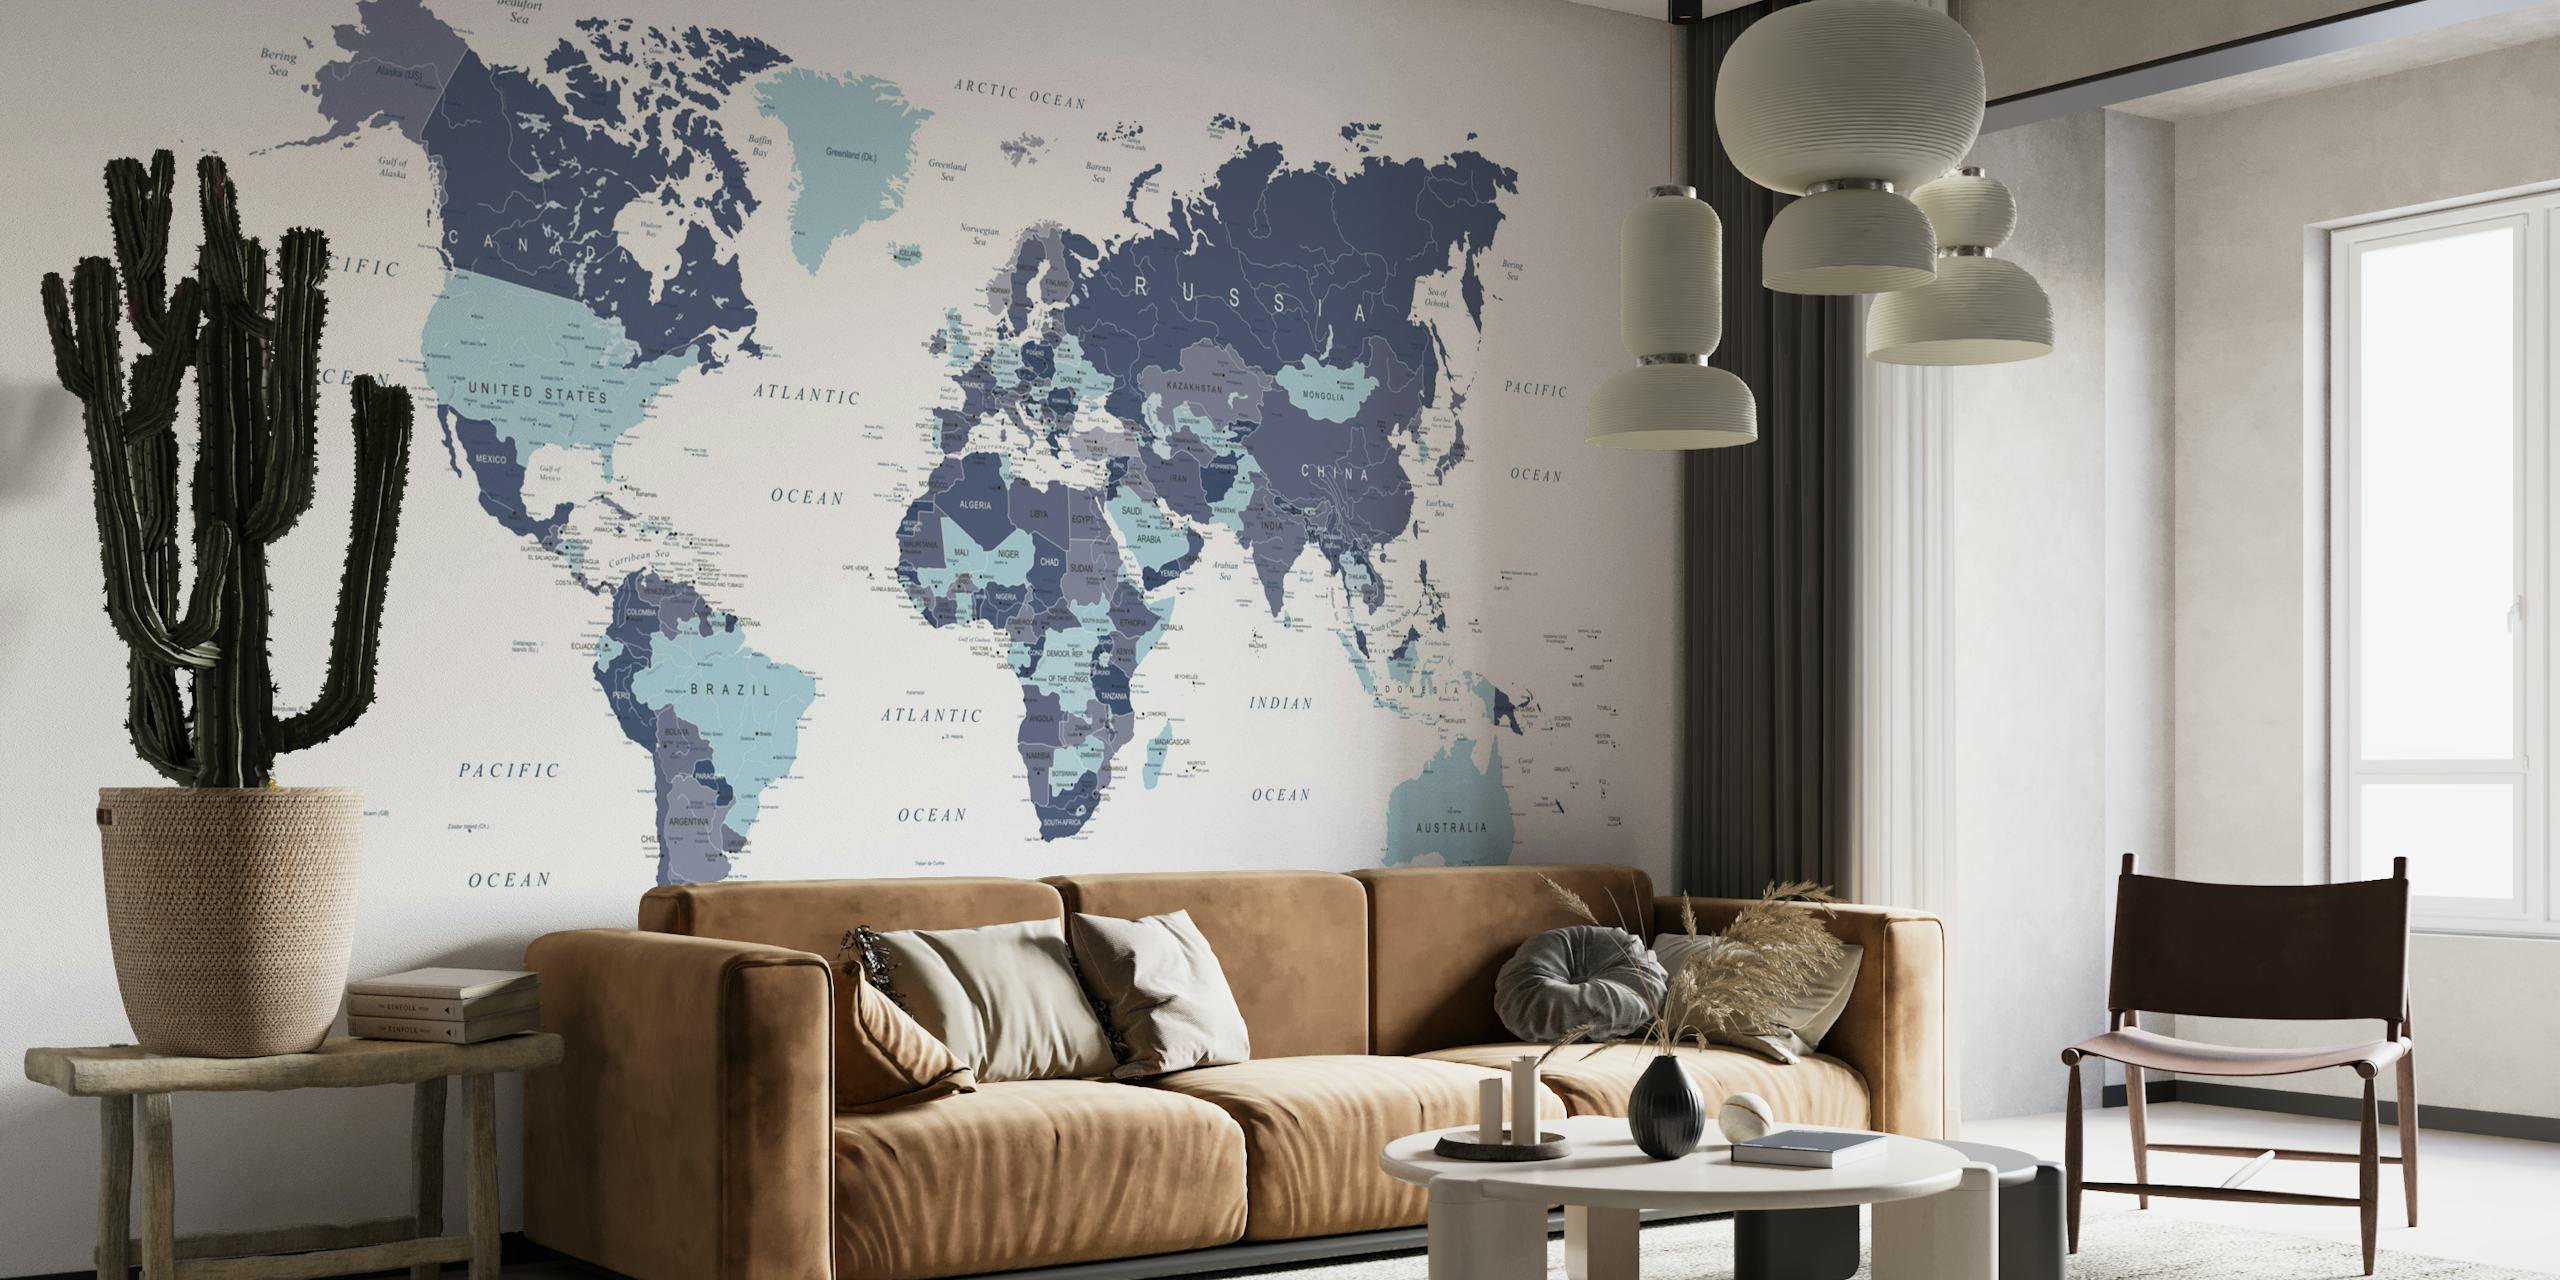 World Map in Blue and White papel pintado